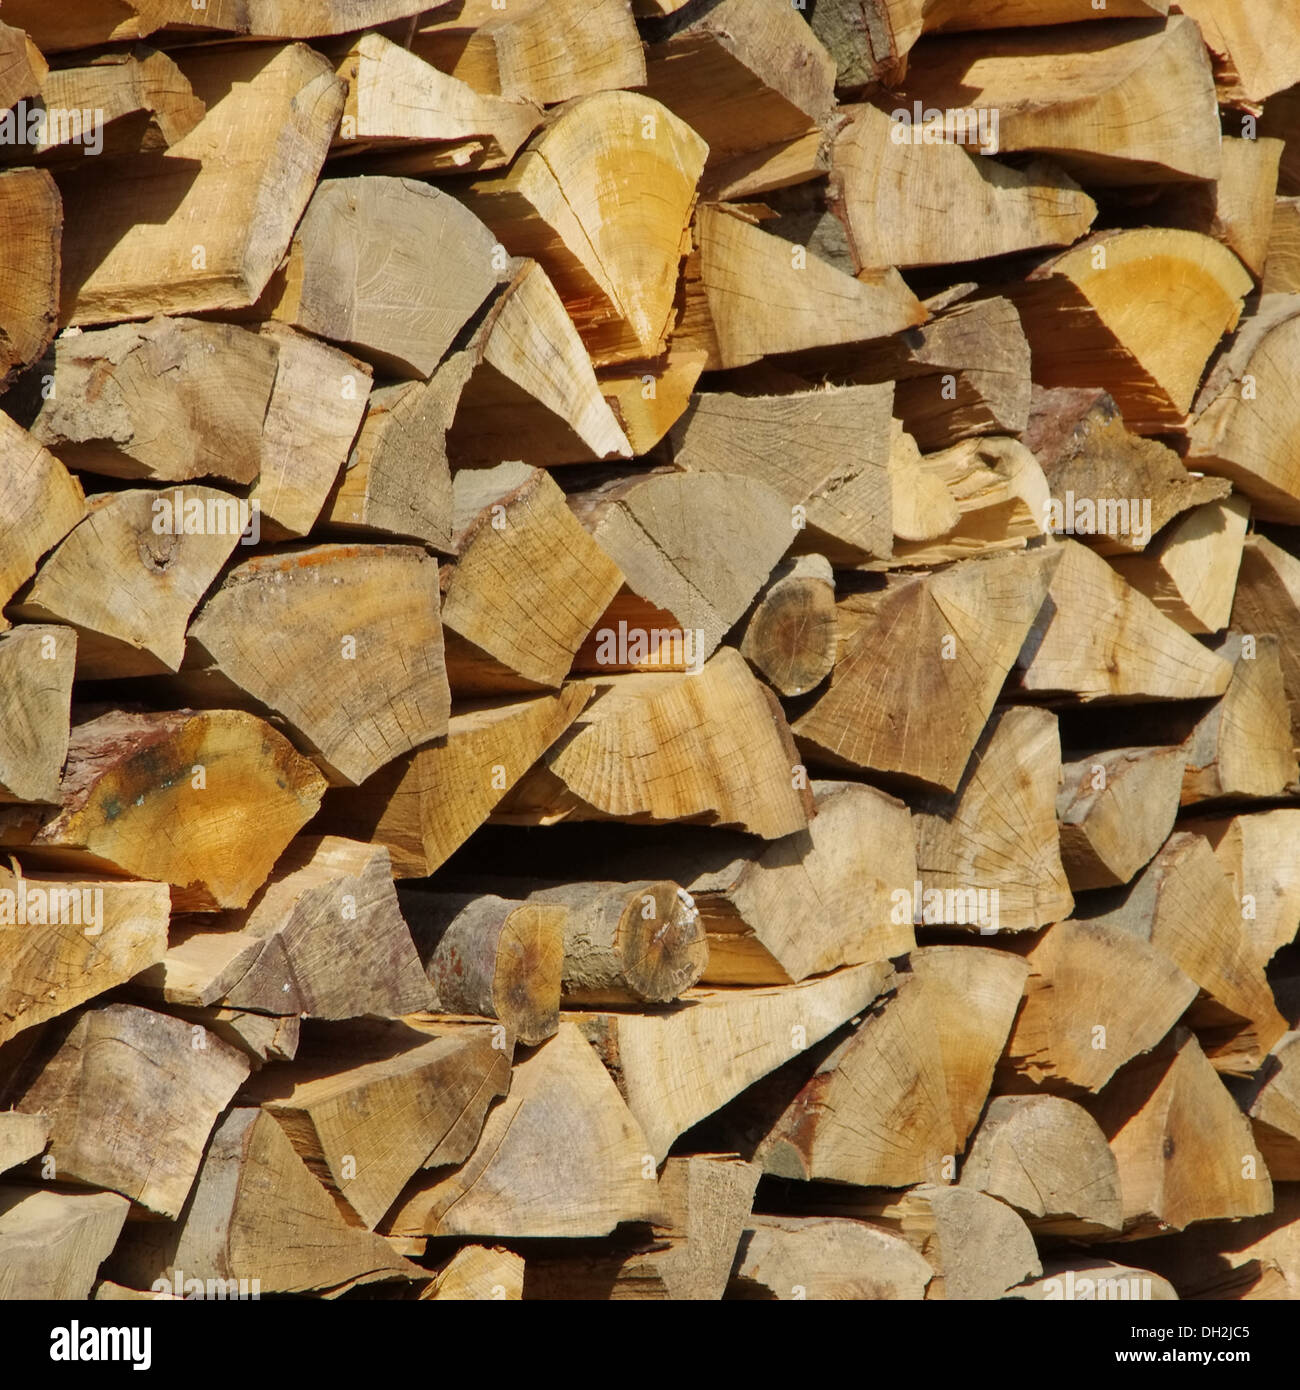 Holzstapel - stack of wood 39 Stock Photo